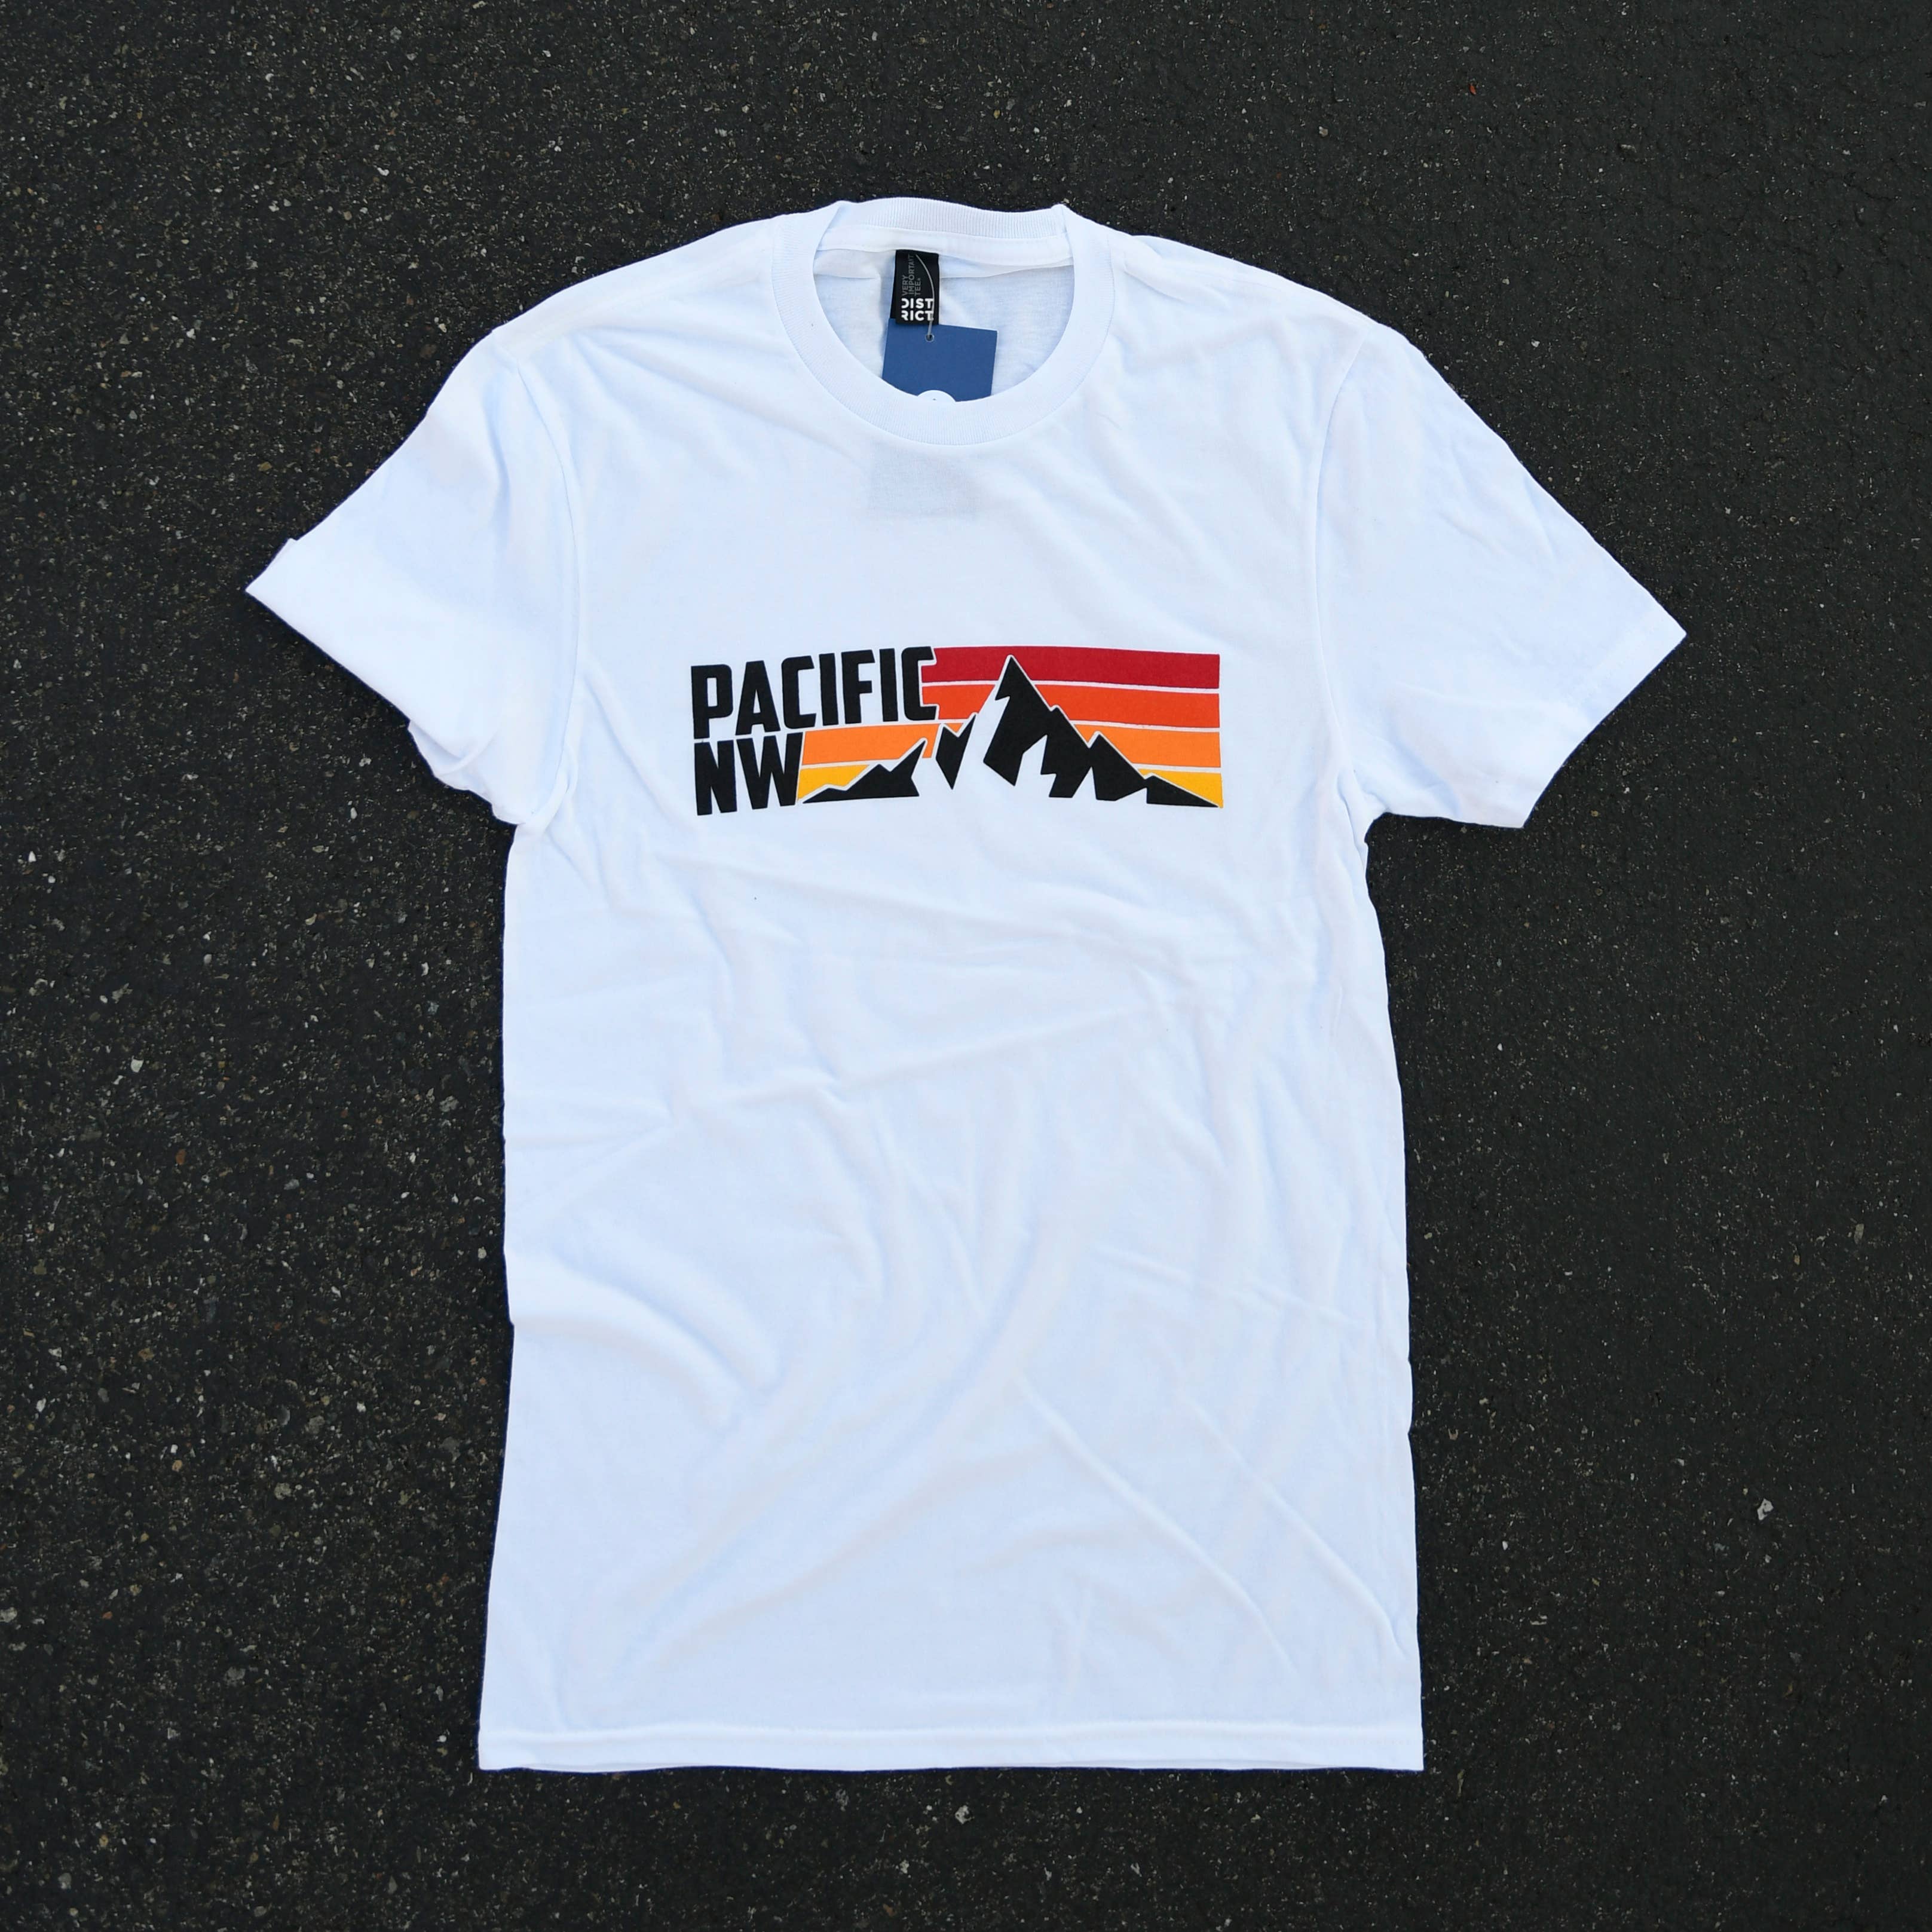 Pacific NW Stripe Graphic Tee